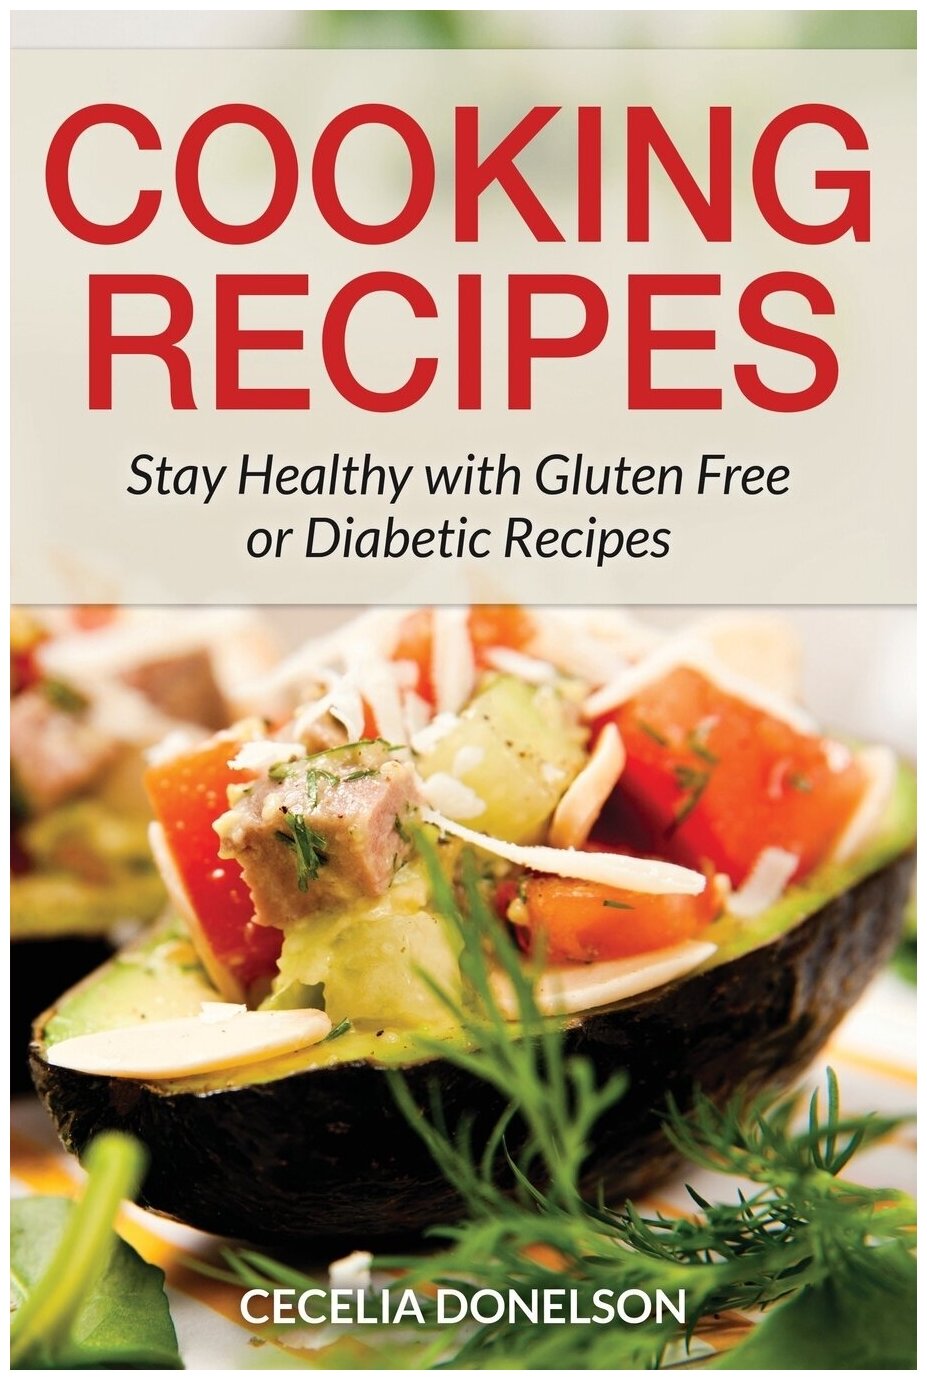 Cooking Recipes. Stay Healthy with Gluten Free or Diabetic Recipes